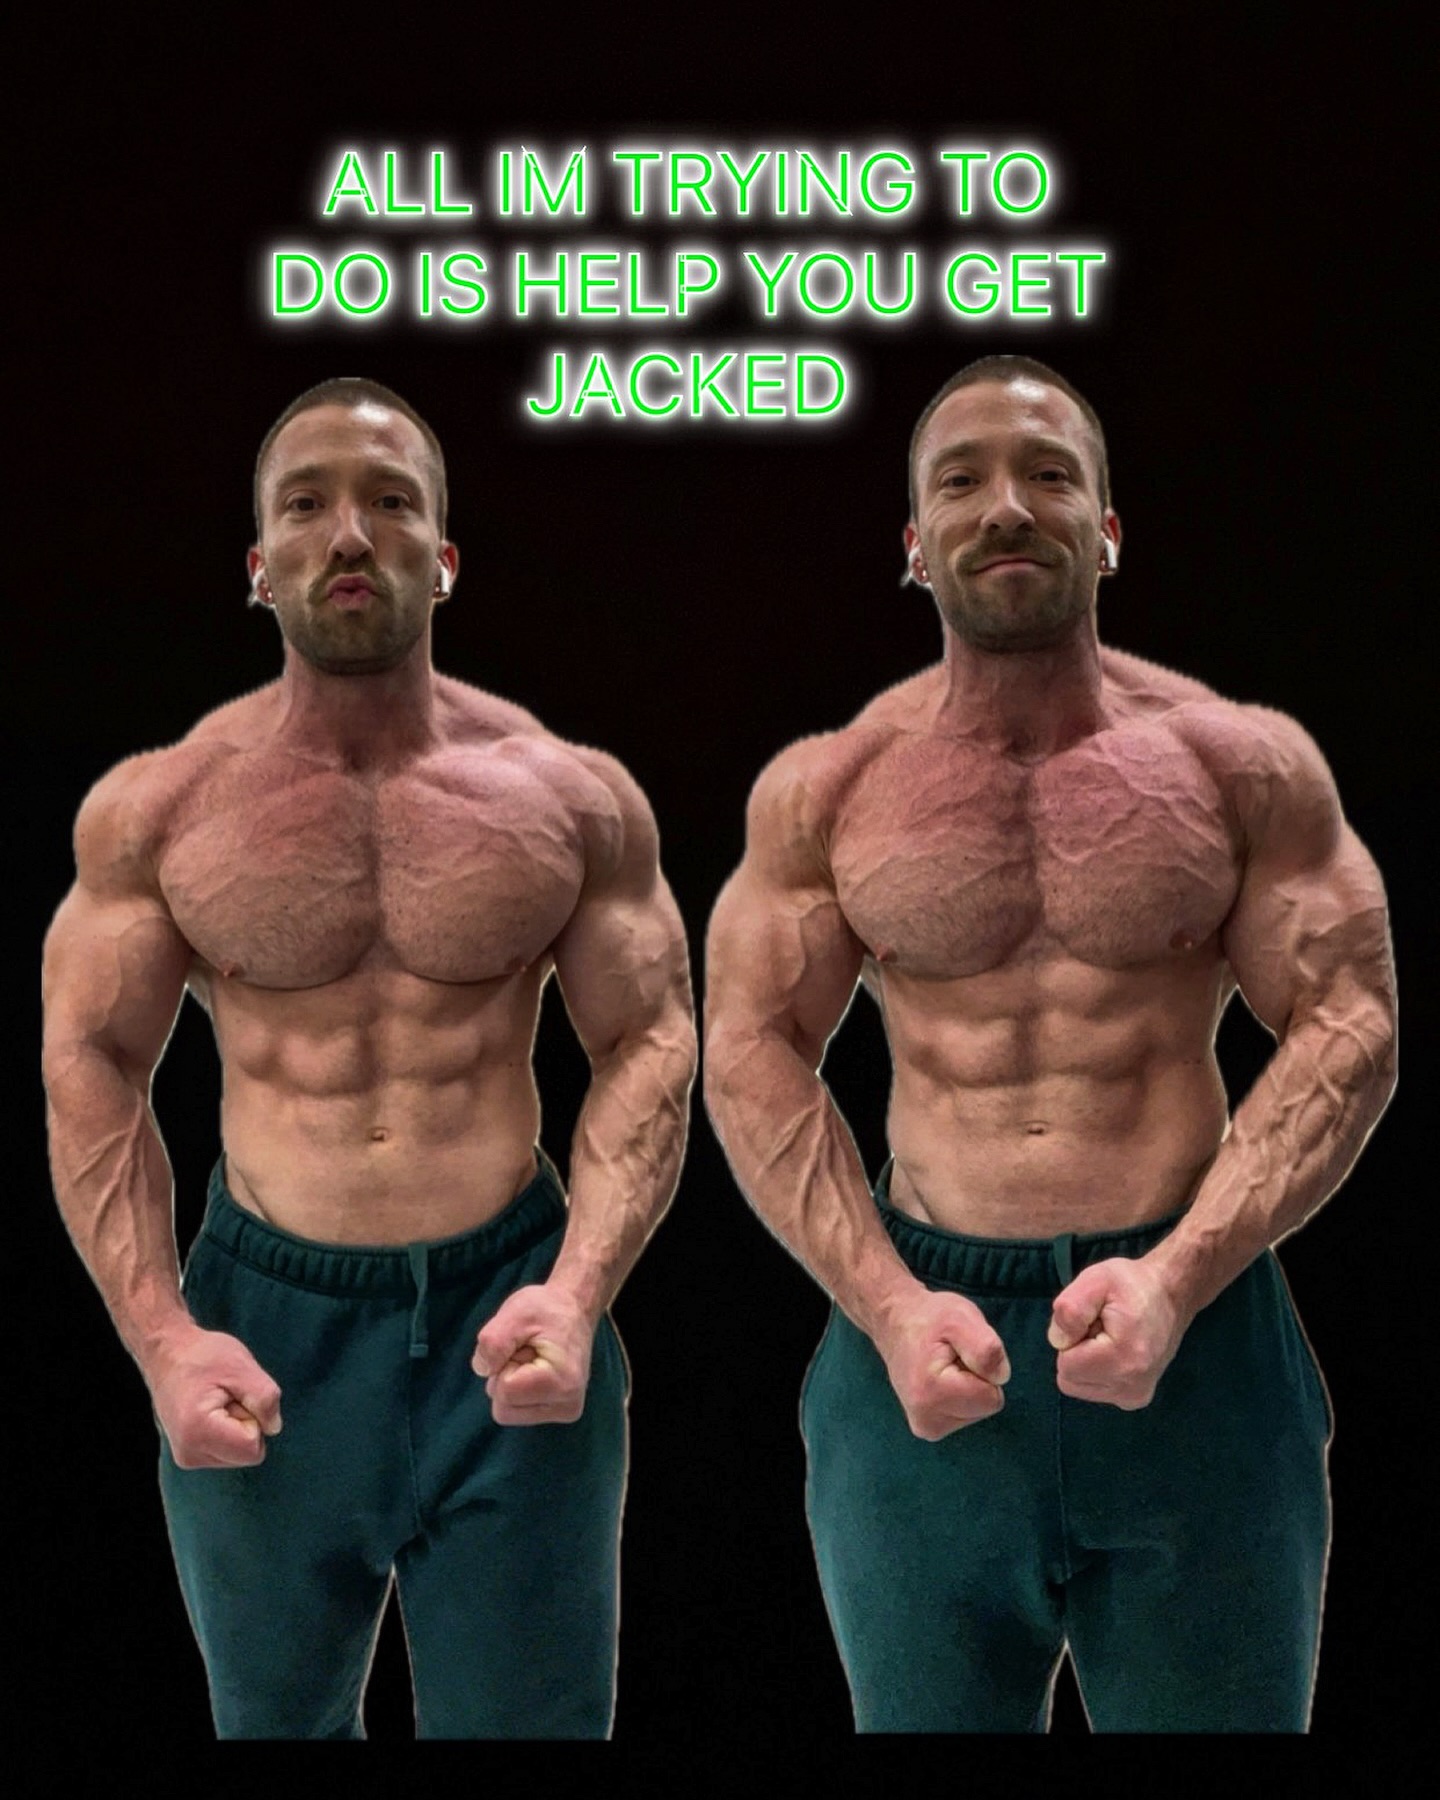 Whether it’s In-person or online coaching, I got your back 💪🏼
.
In person training available at 2 locations in Virginia Beach , Va 
.
Reach out if you would like a new challenge or assistance or maybe wanting to build some confidence 🤝
.
.
4weeksout #24daysout #veins #muscle #virginia #virginiabeach #virginiabeachpersonaltrainer #onlinecoaching #inpersontraining #classicphysique #gynmotivation